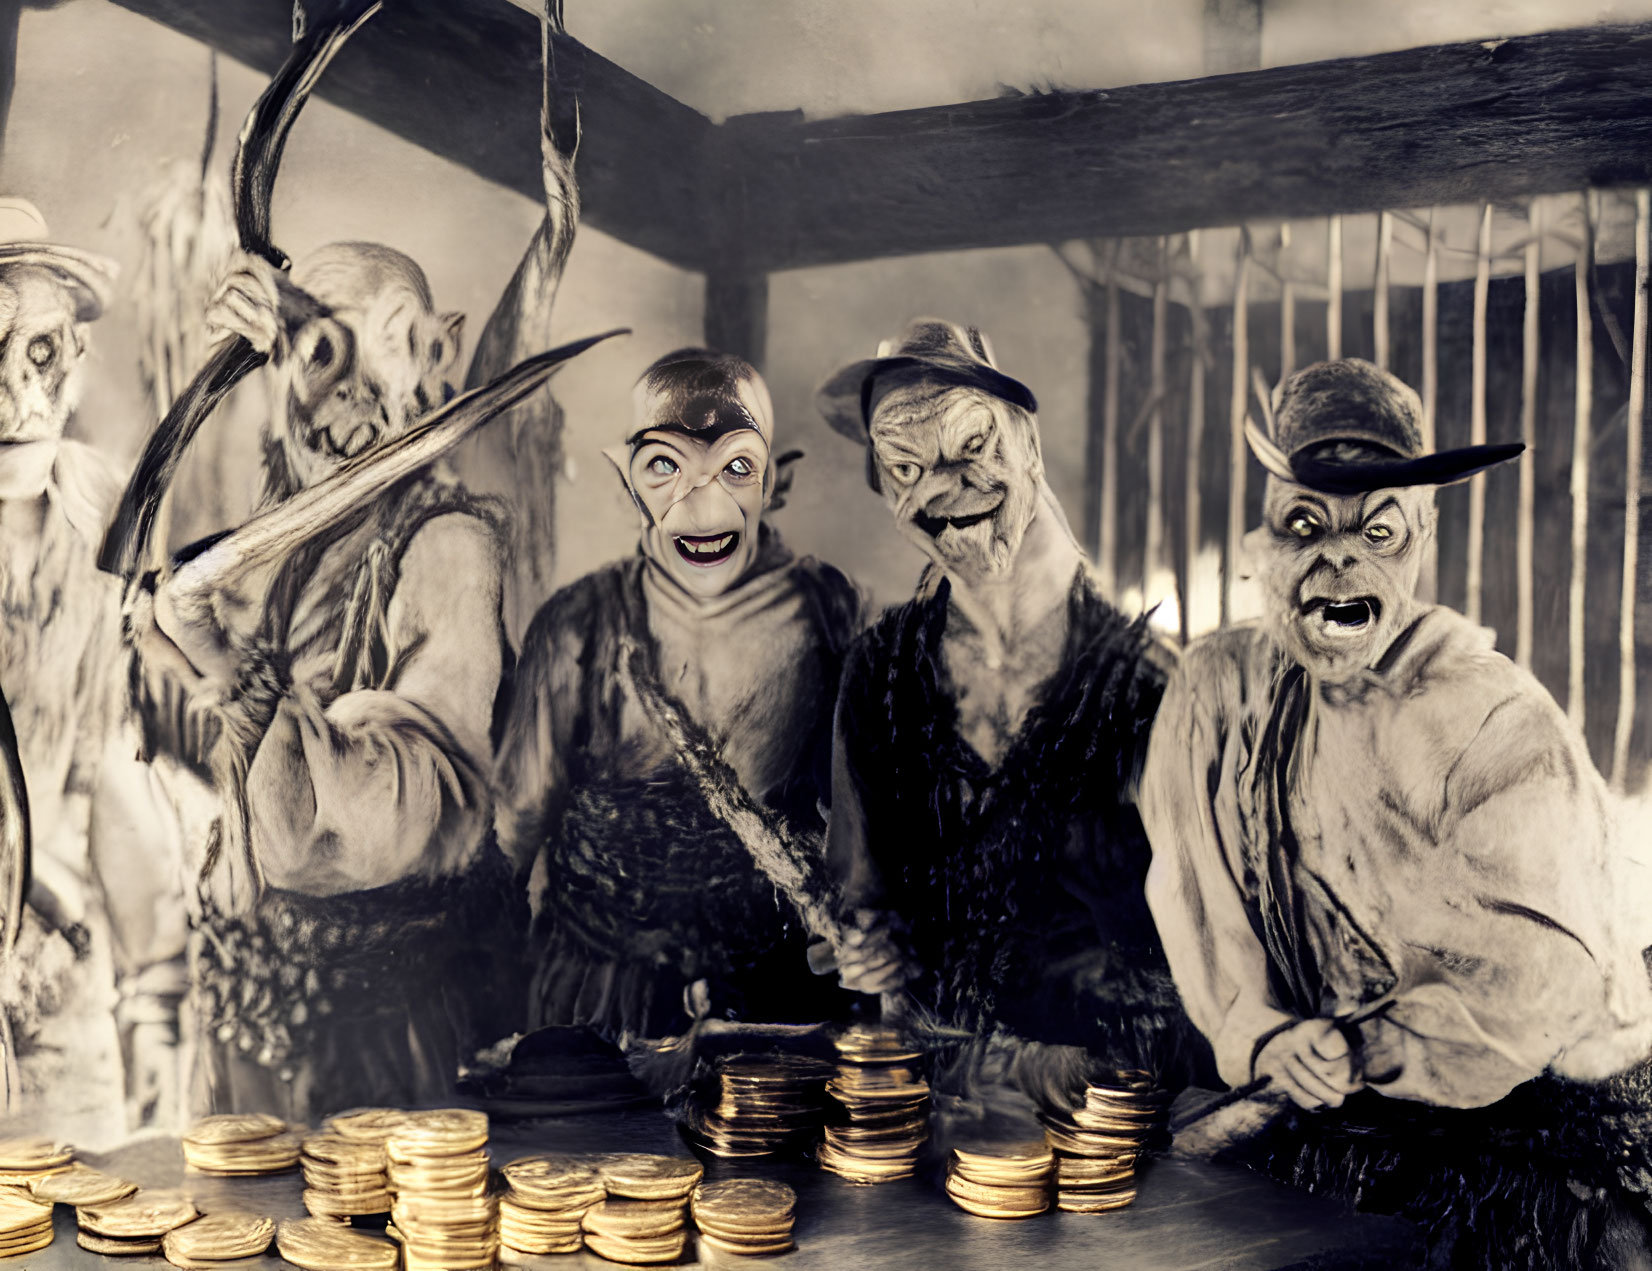 Monochrome image: Four figures in goblin attire with expressive faces by gold coins